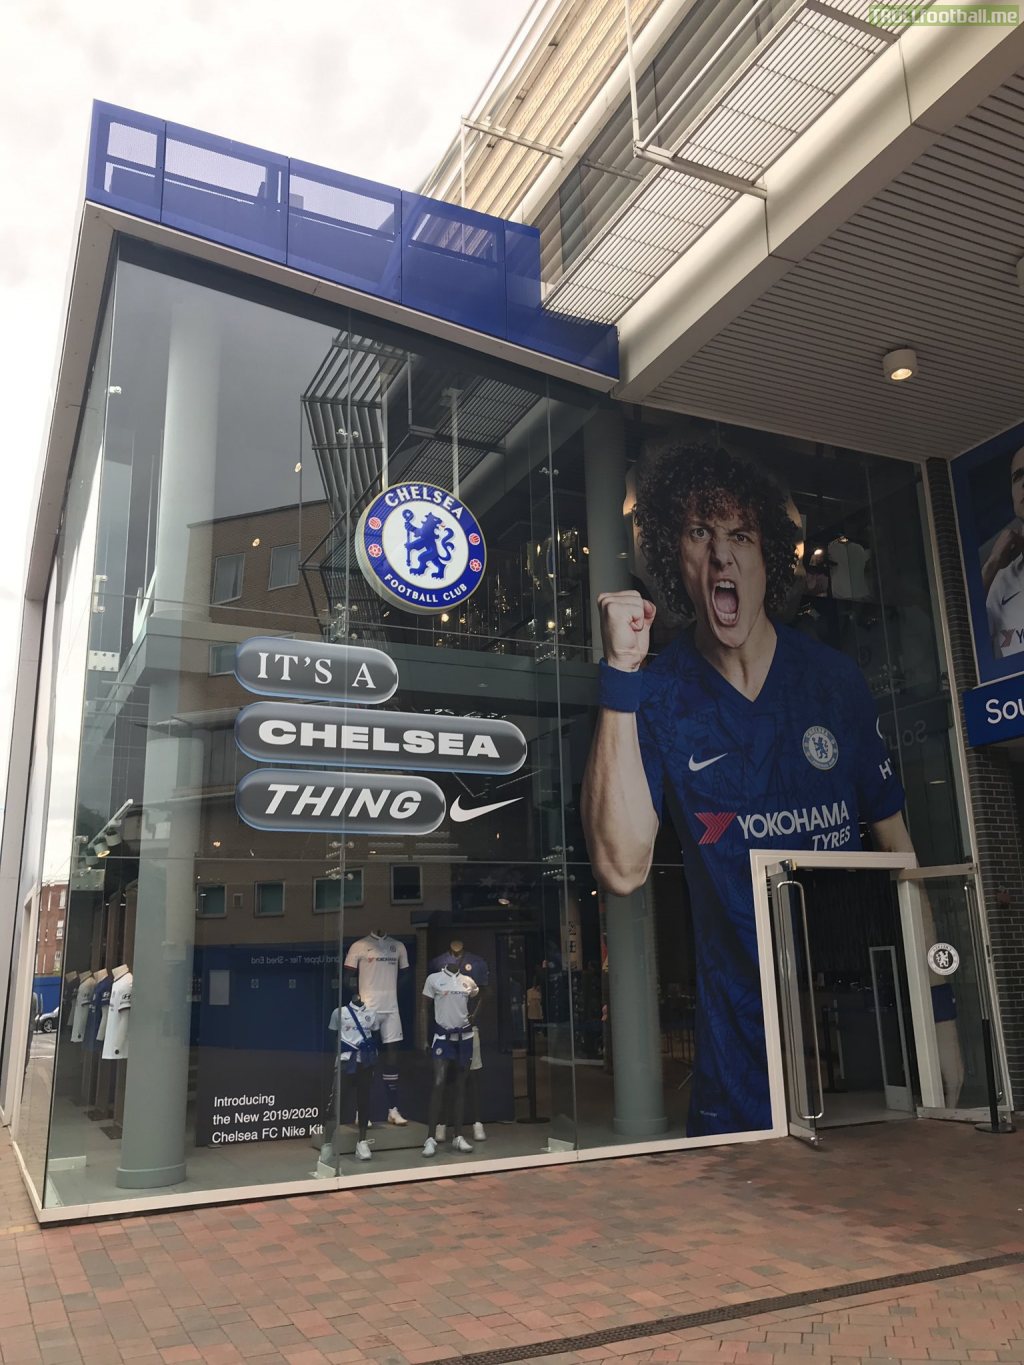 Chelsea had only just finished updating the face of their megastore from Hazard